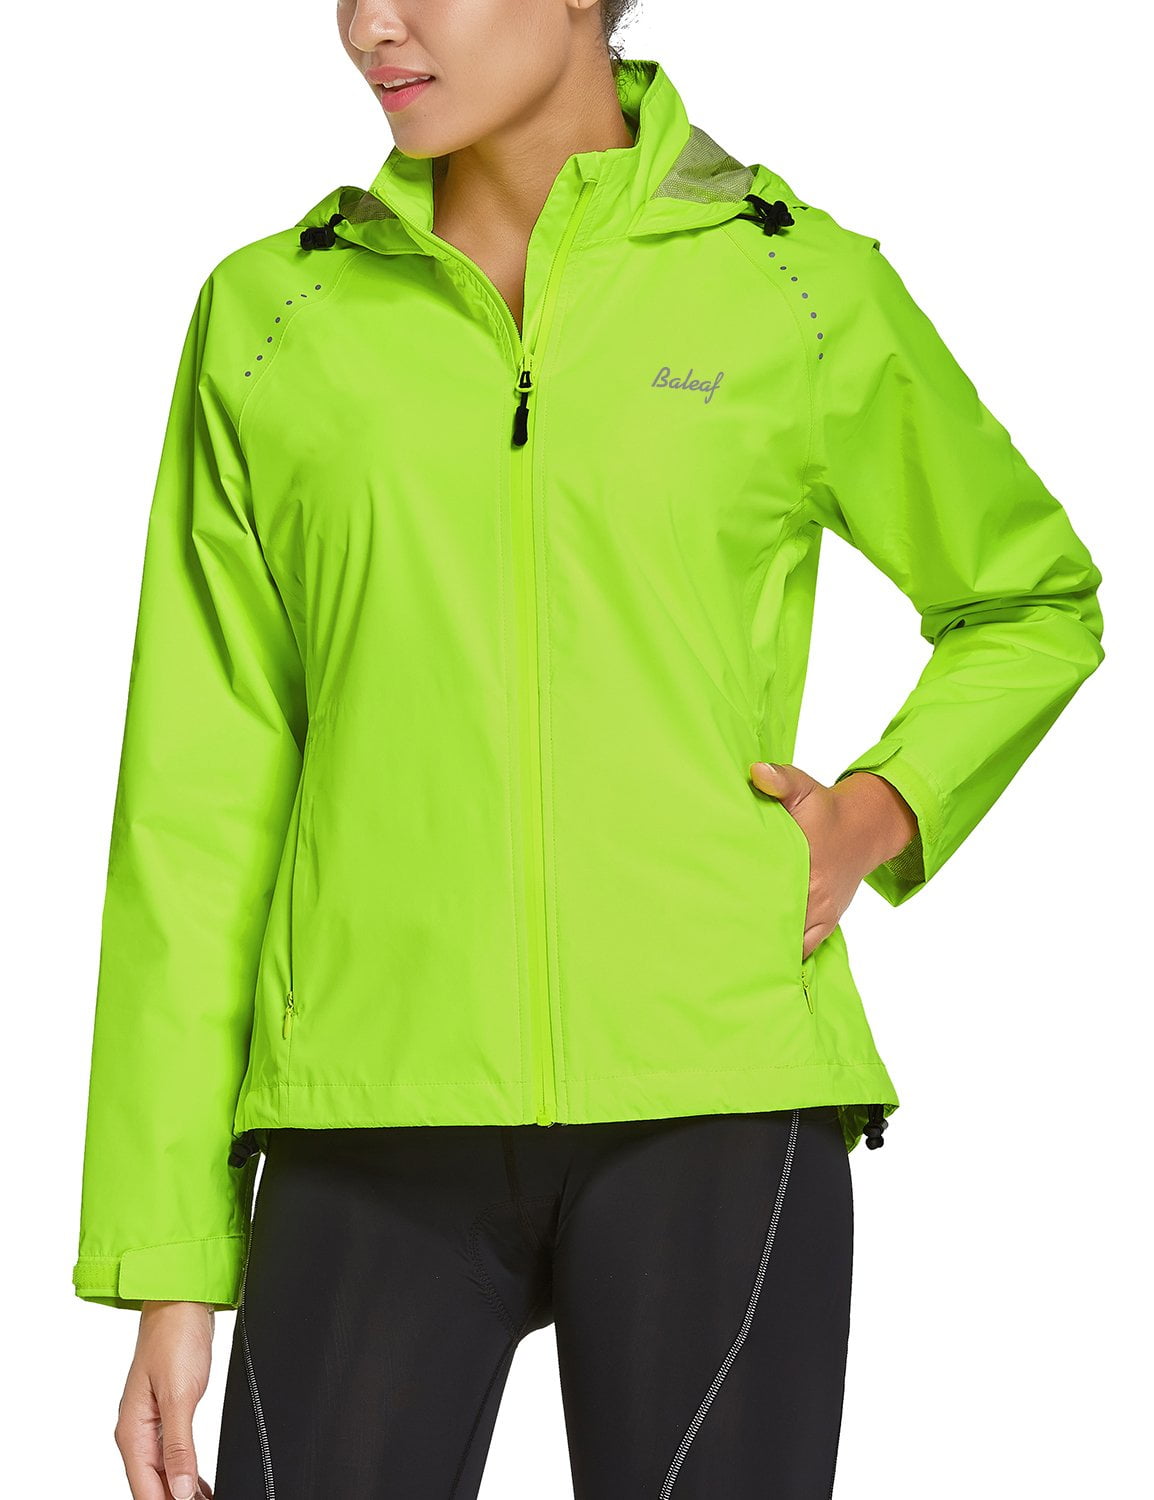 33,000ft Women's Zip Up Lightweight Athletic Workout Yoga Cycling Track Running Jacket Waterproof Windproof Reflective 